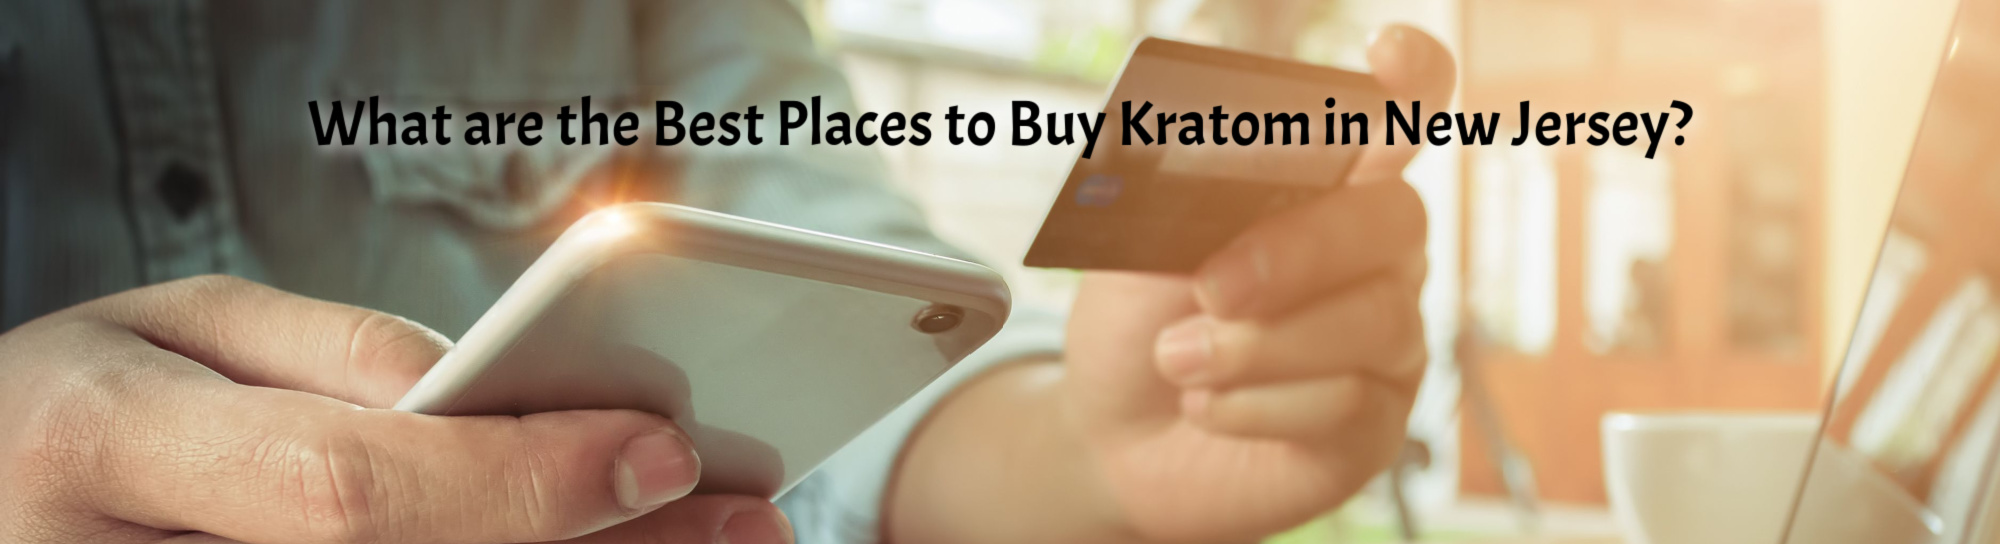 image of what are the best places to buy kratom in new jersey